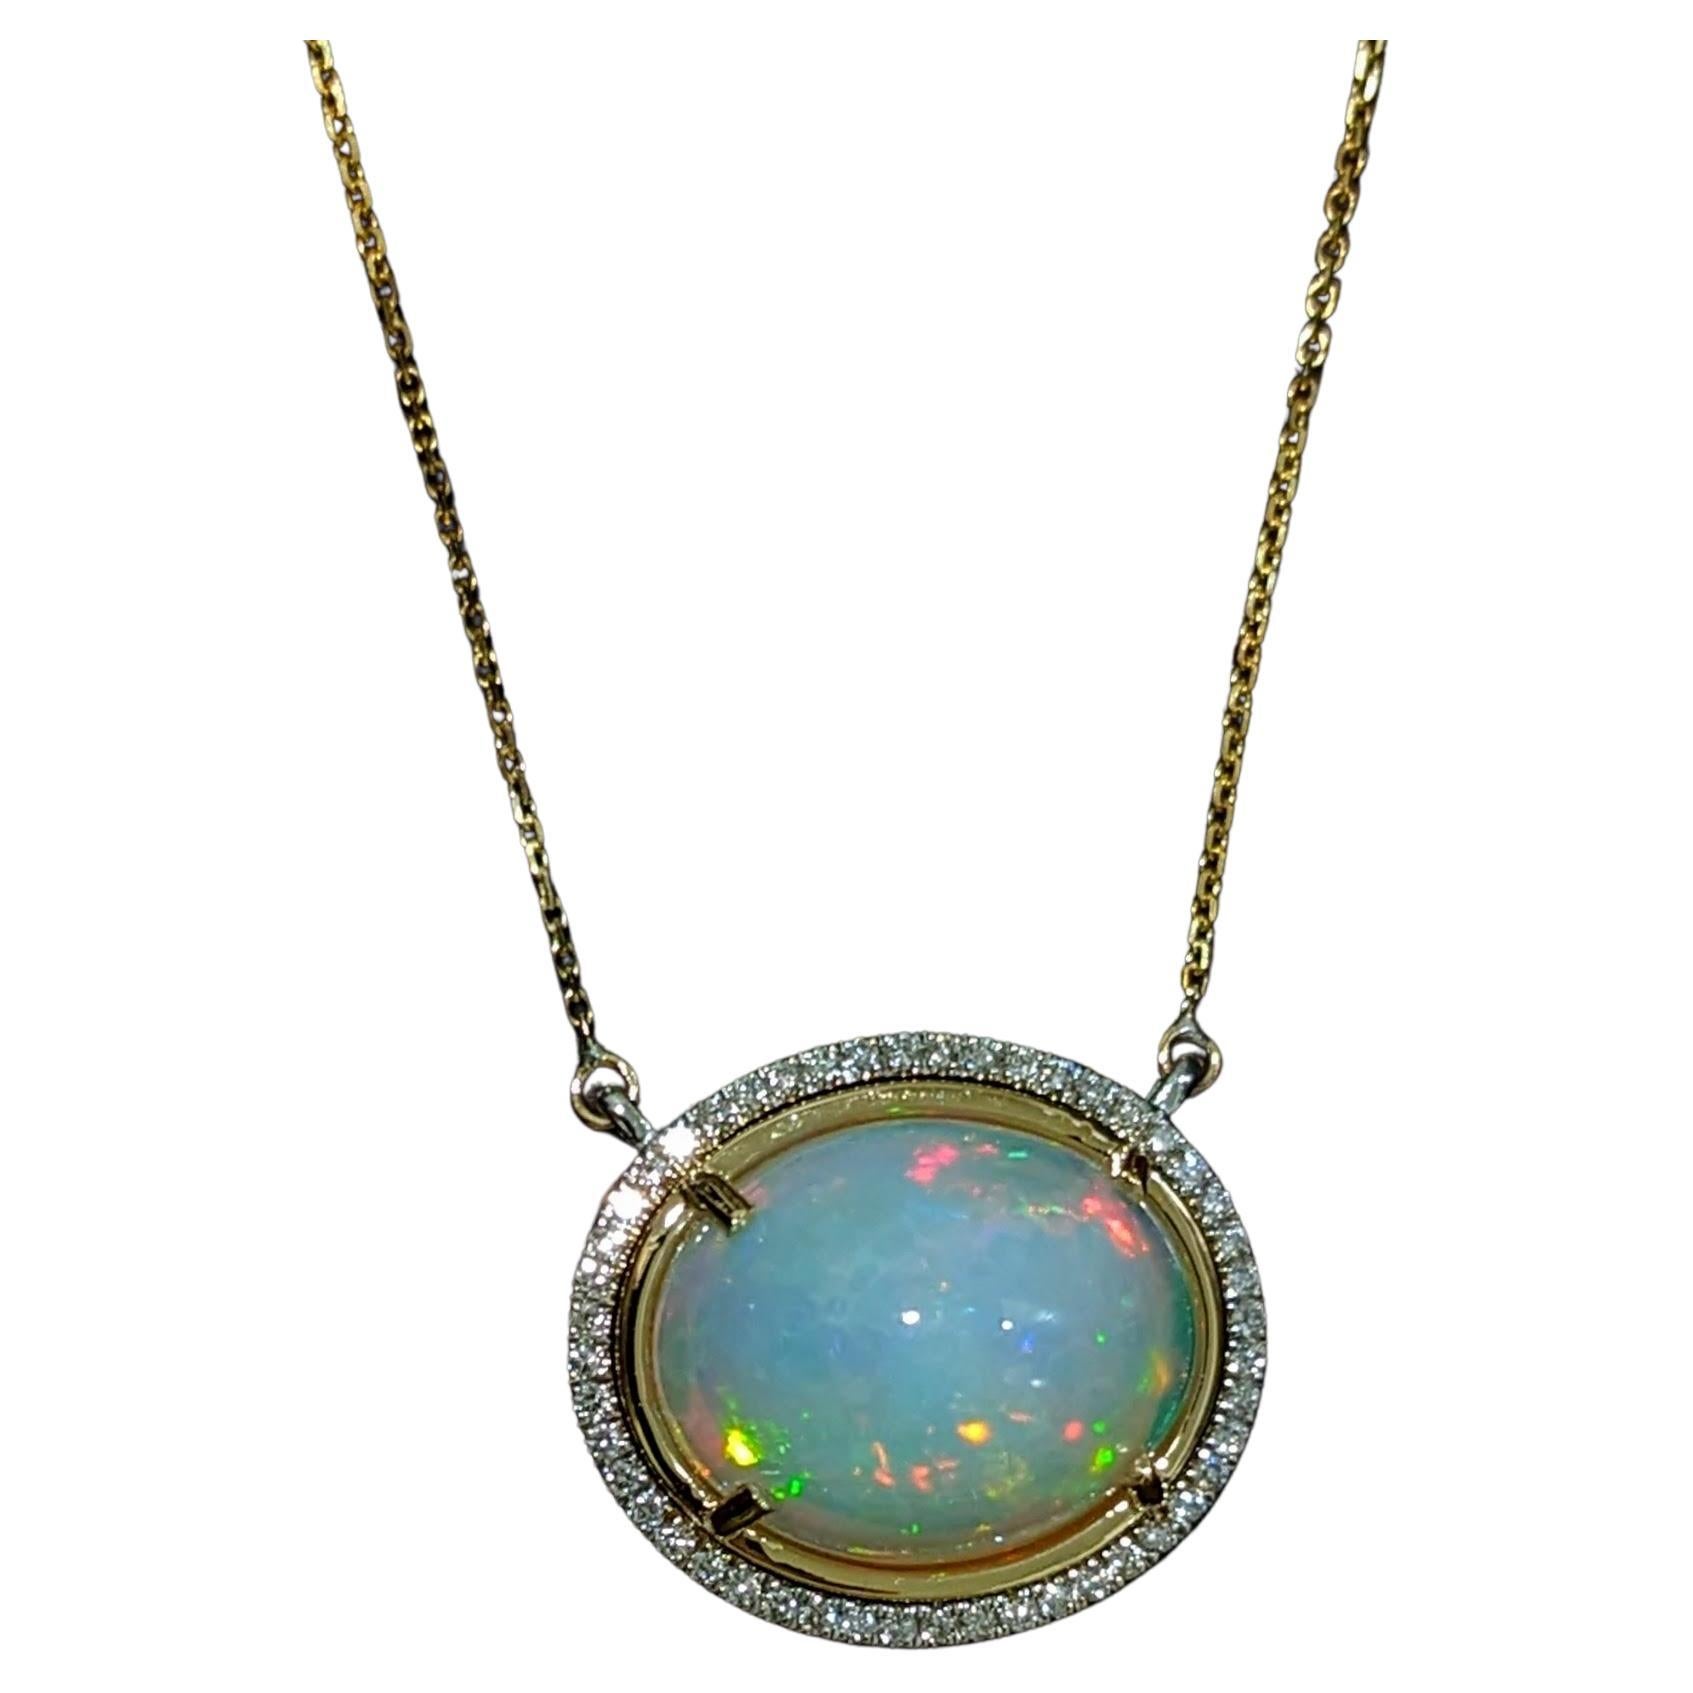 6.6ct Opal Pendant Necklace w Earth Mined Diamonds in Solid 14K Yellow Gold